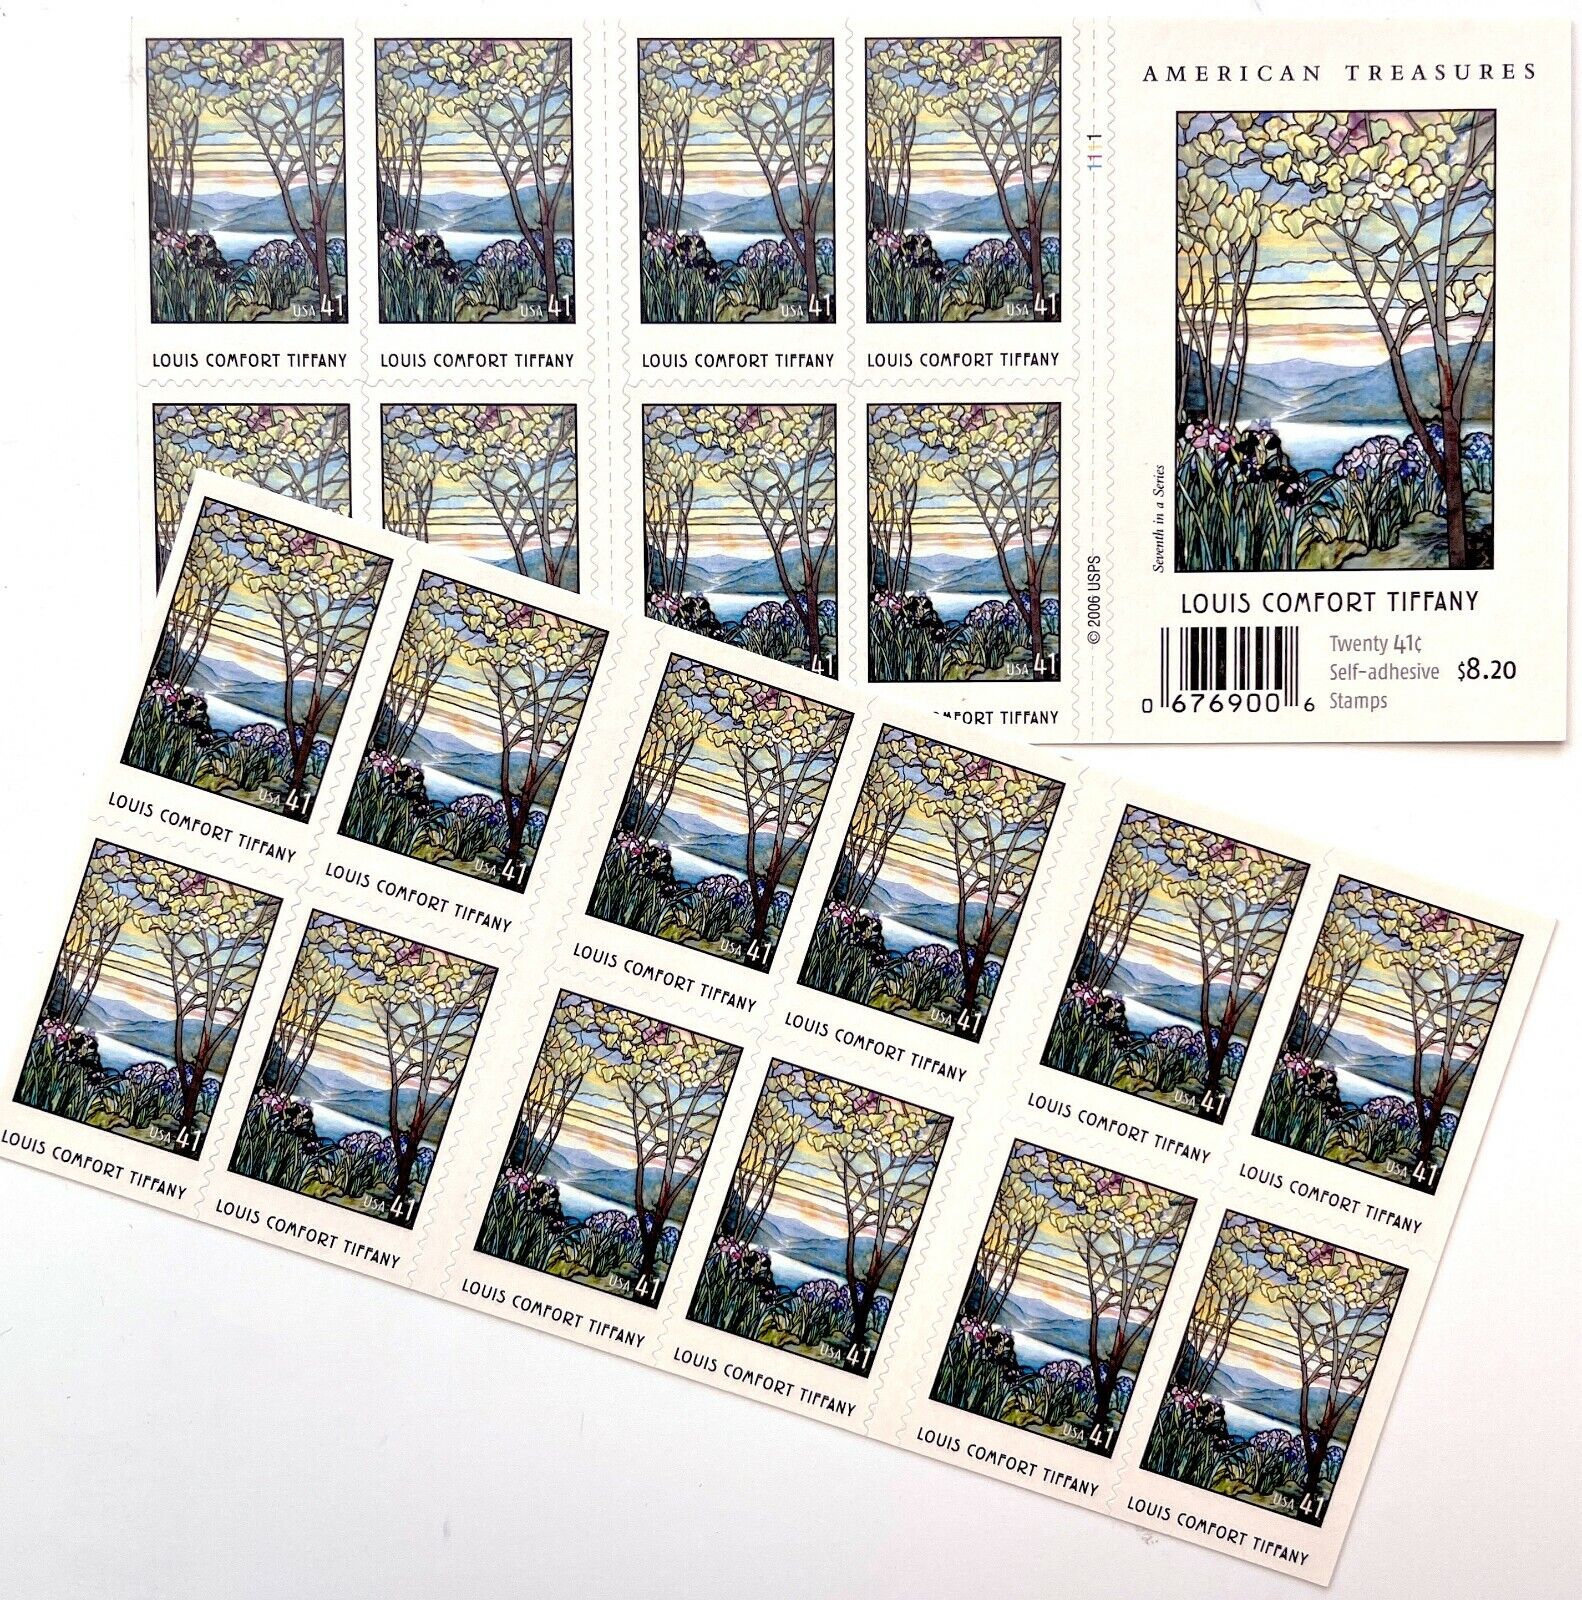 Us #4165 American Treasures: Tiffany 41c (2007) - Book Of 20 Postage Stamps Mnh